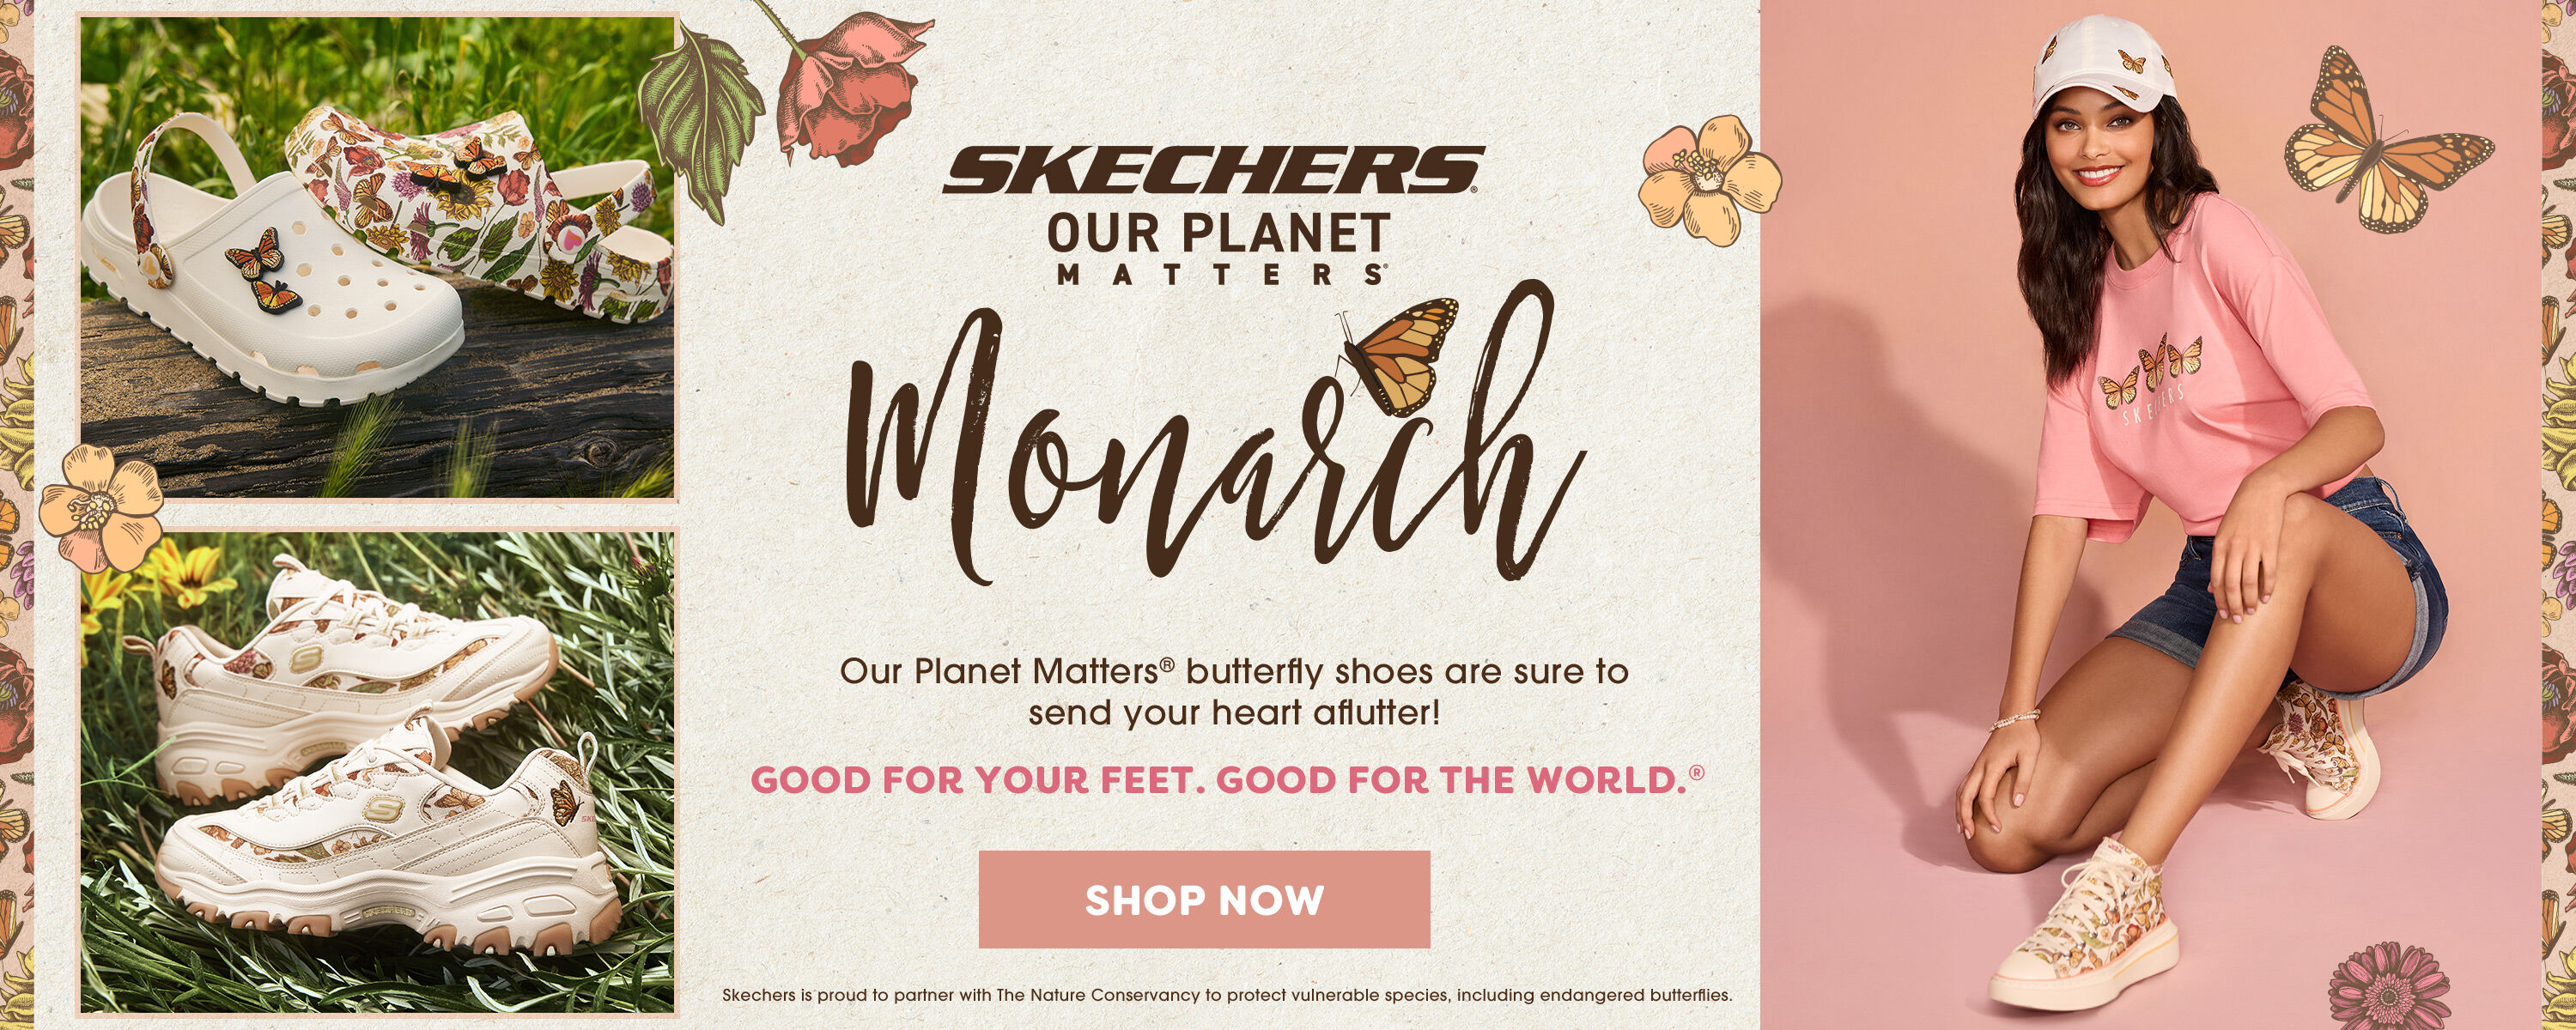 Our Planet Matters Monarch